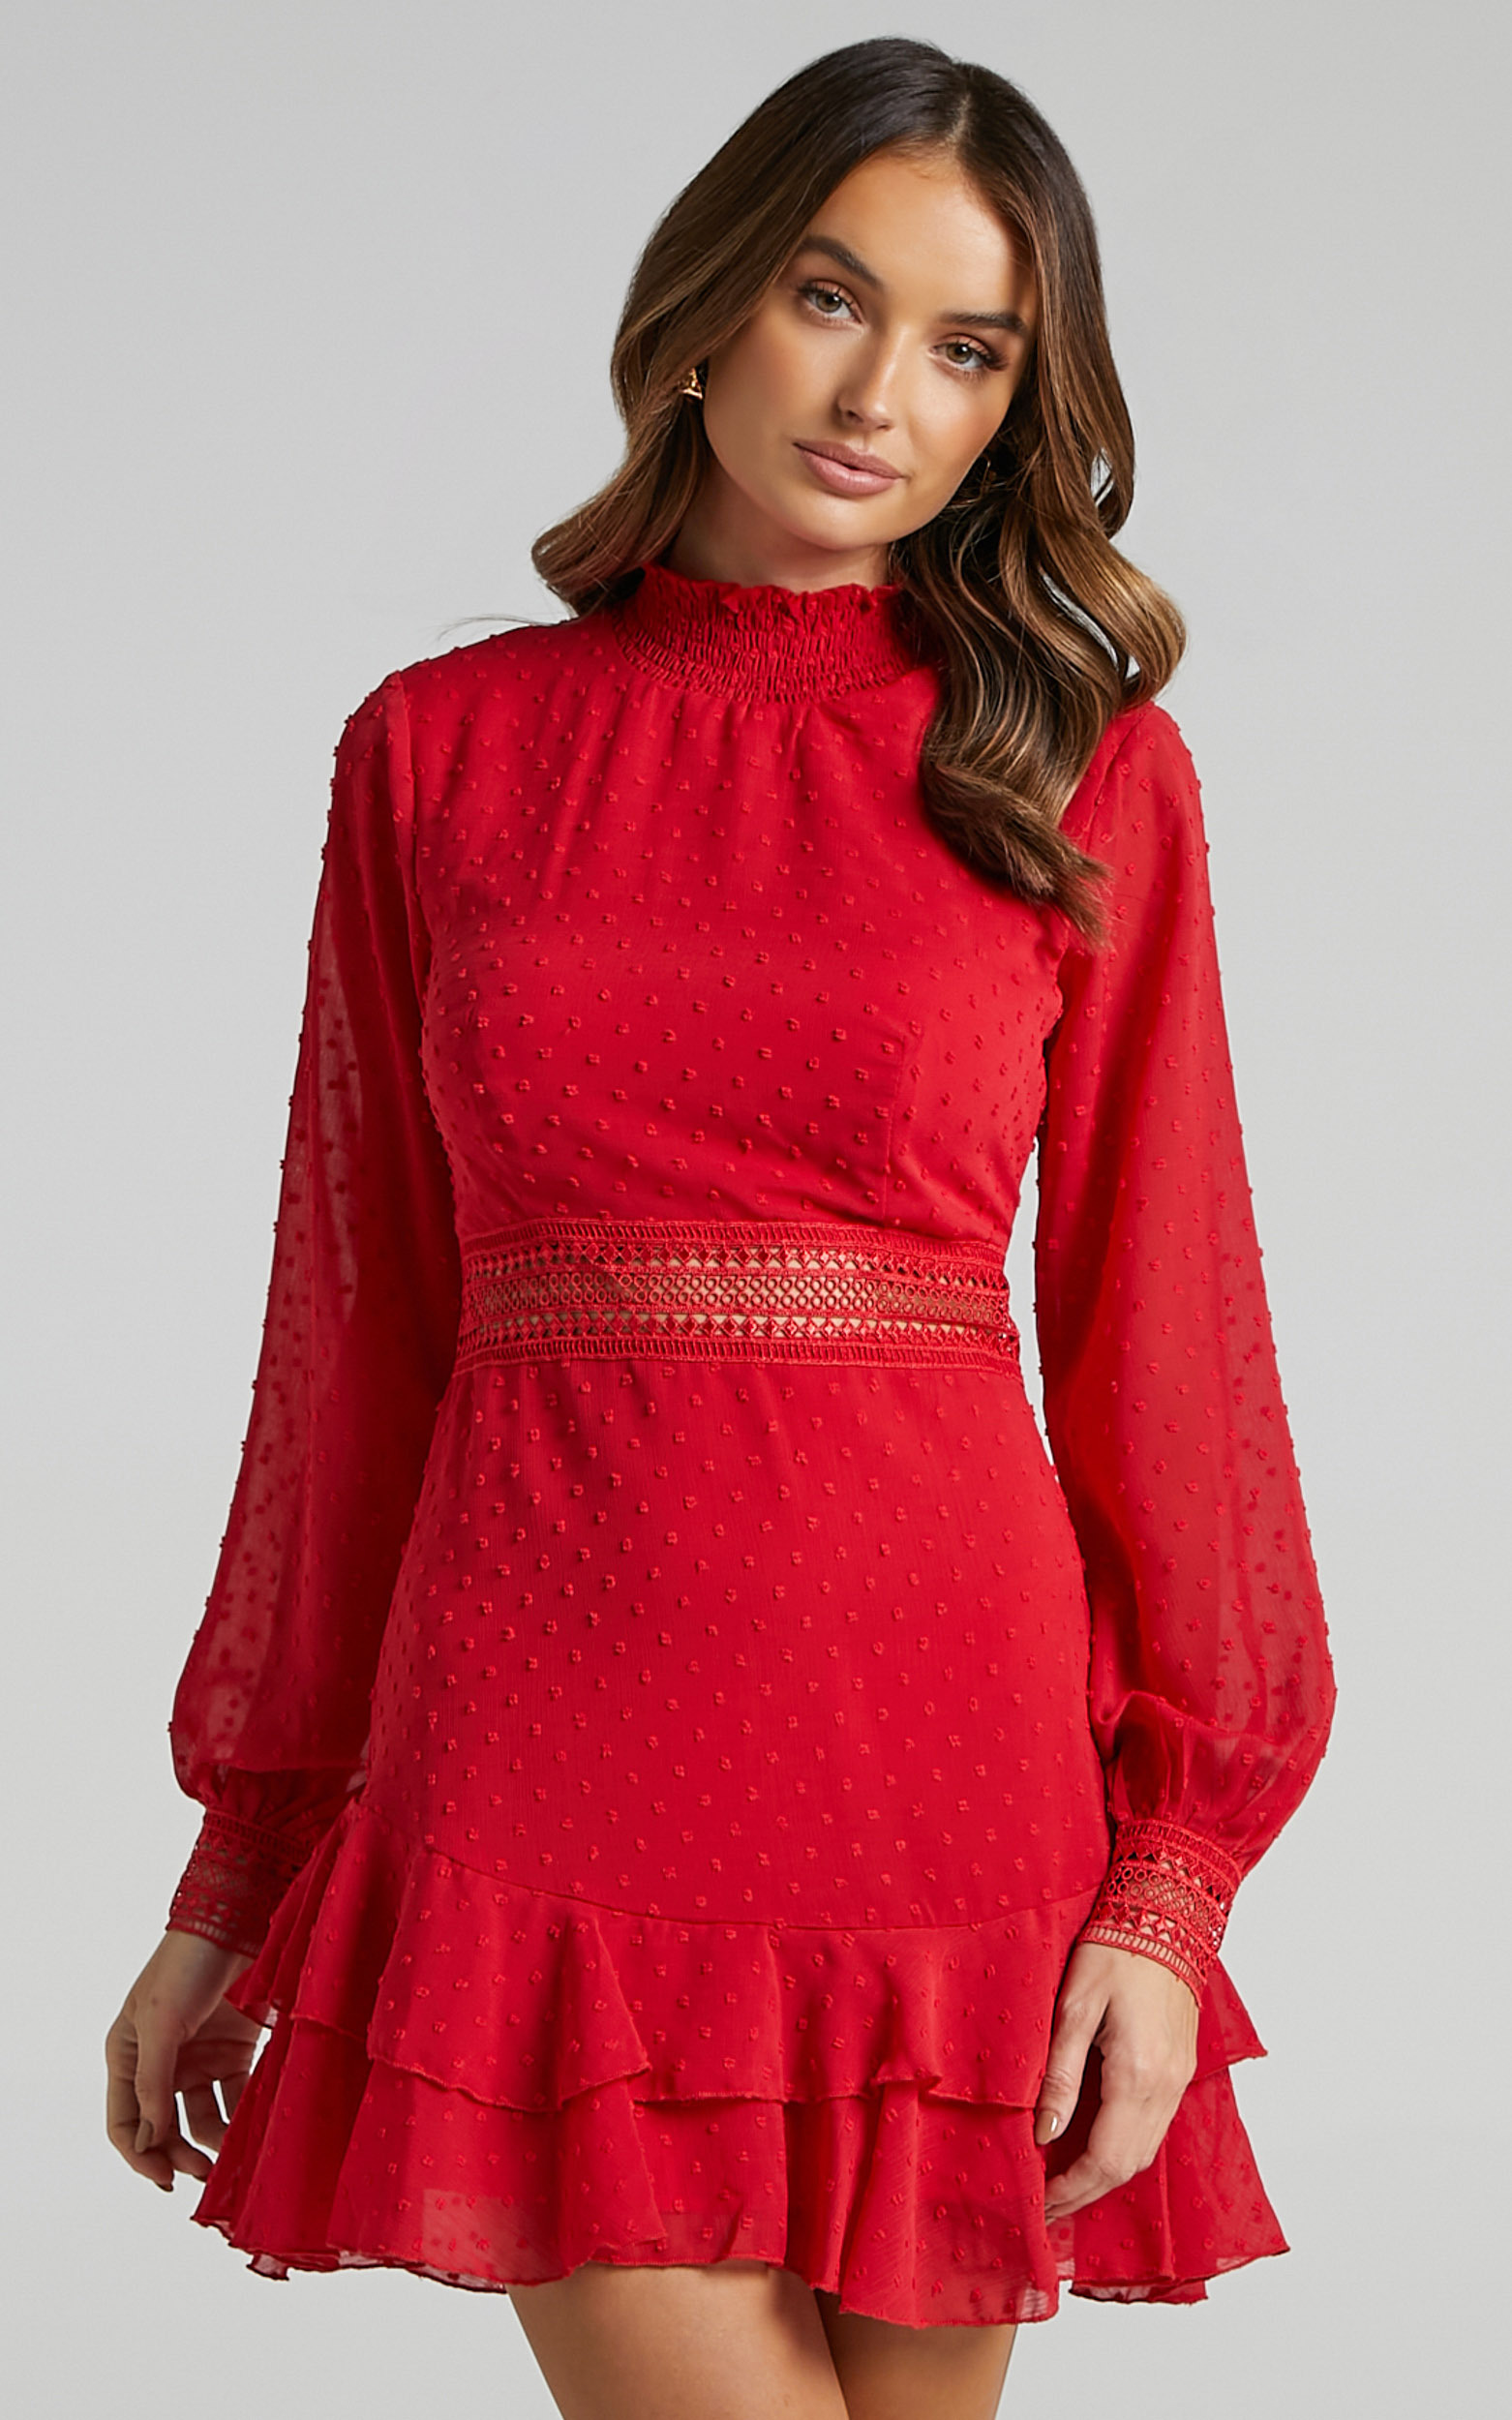 Are You Gonna Kiss Me Long Sleeve Mini Dress in Red - 04, RED2, hi-res image number null